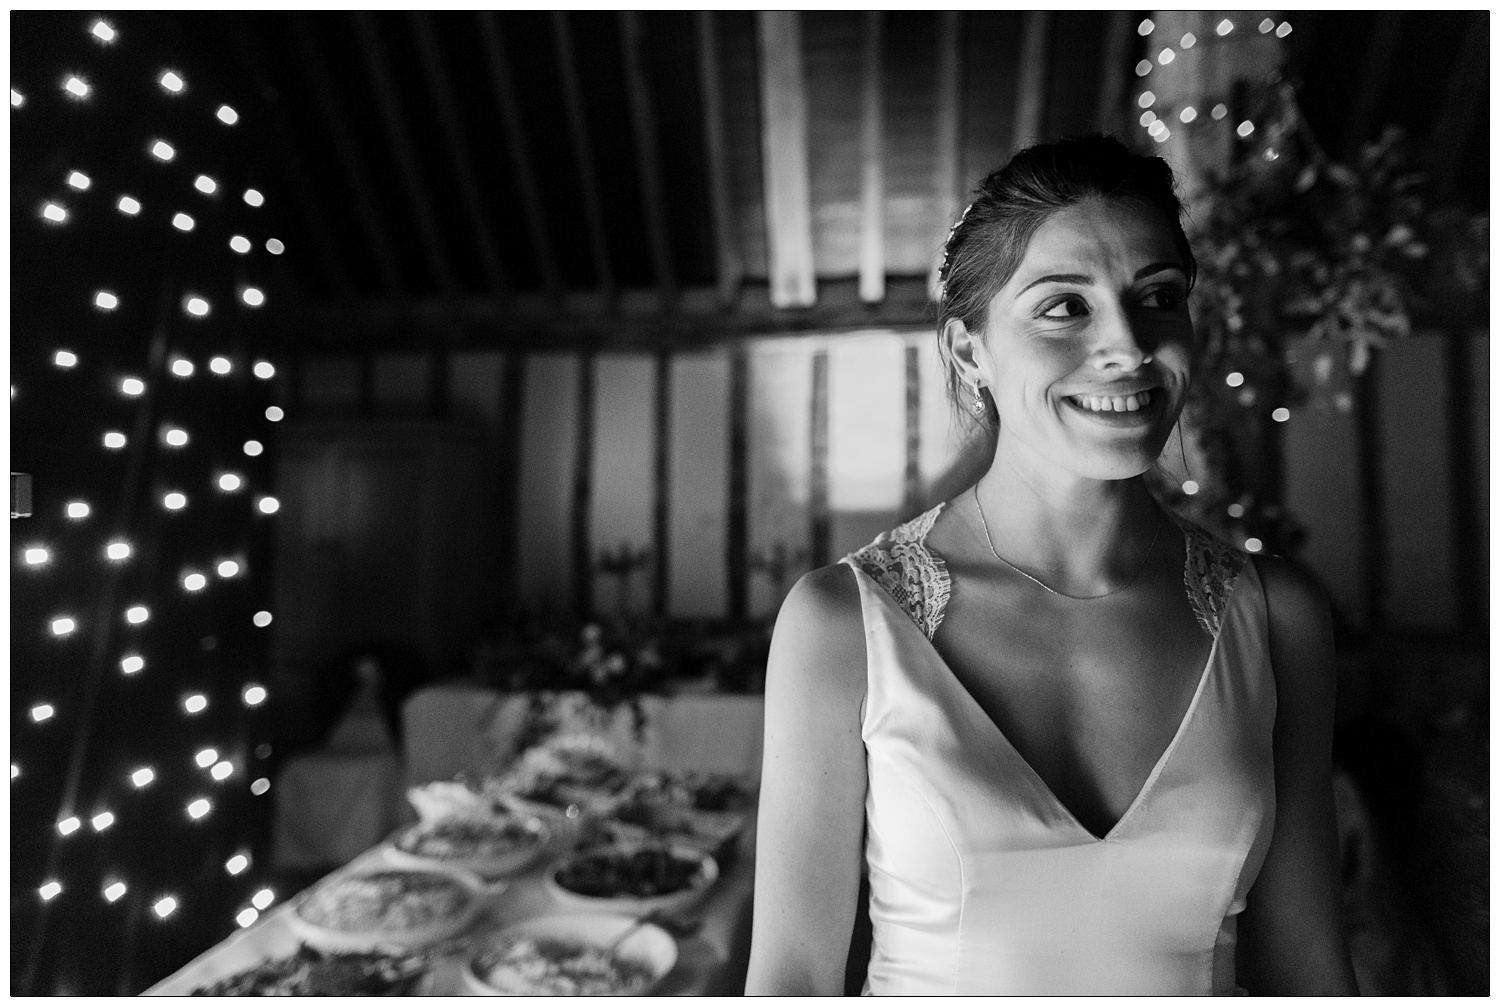 A bride smiling by the buffet table and a wall of little lights. At Pledgdon Barn wedding.